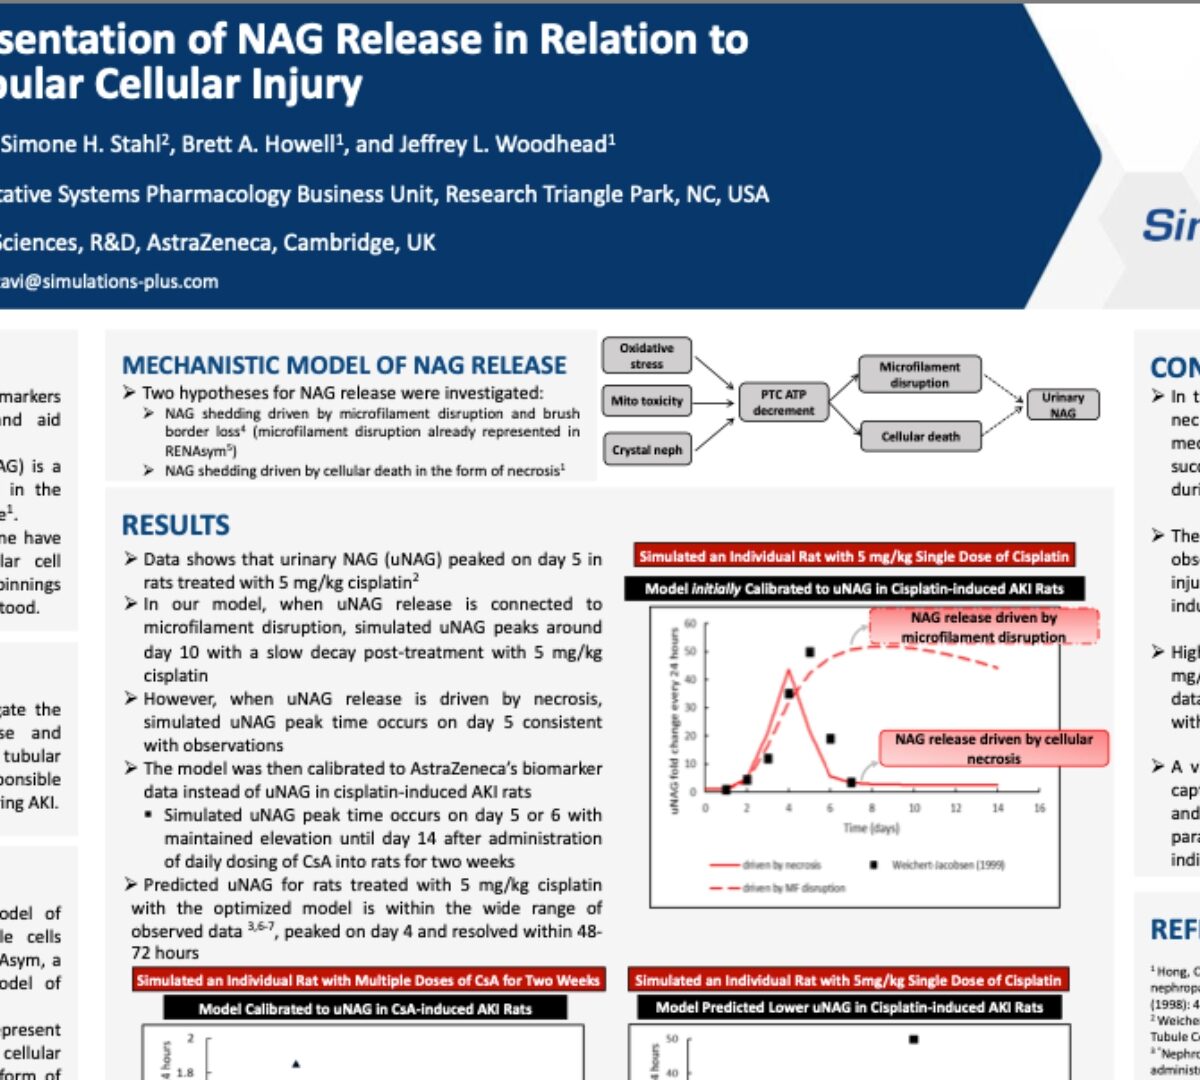 Mechanistic Representation of NAG Release in Relation to Renal Proximal Tubular Cellular Injury